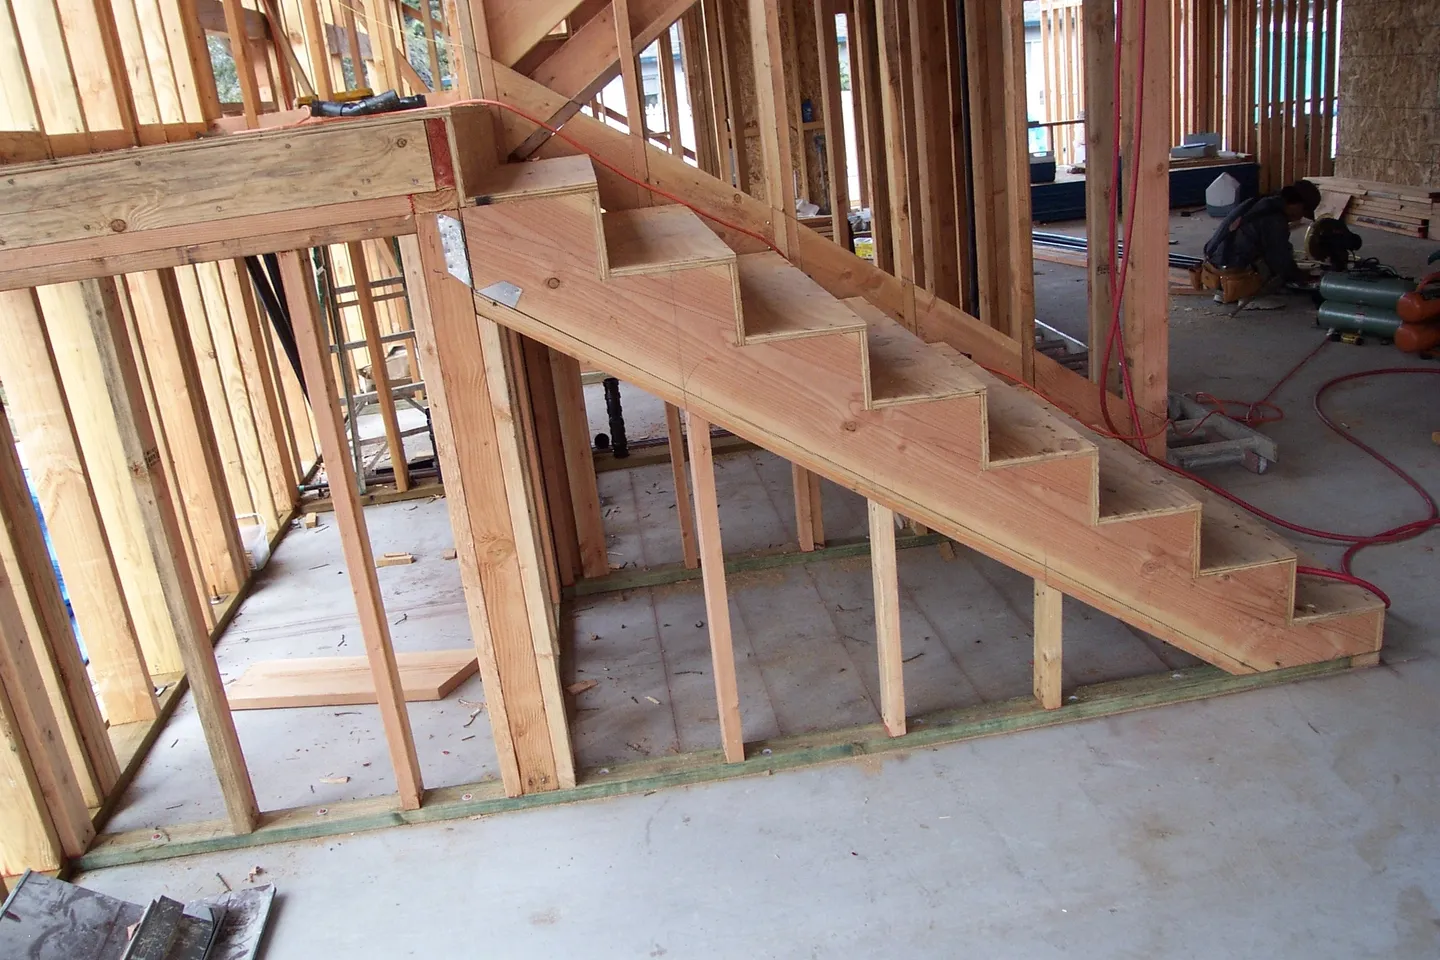 A view of stairs in the middle of construction.